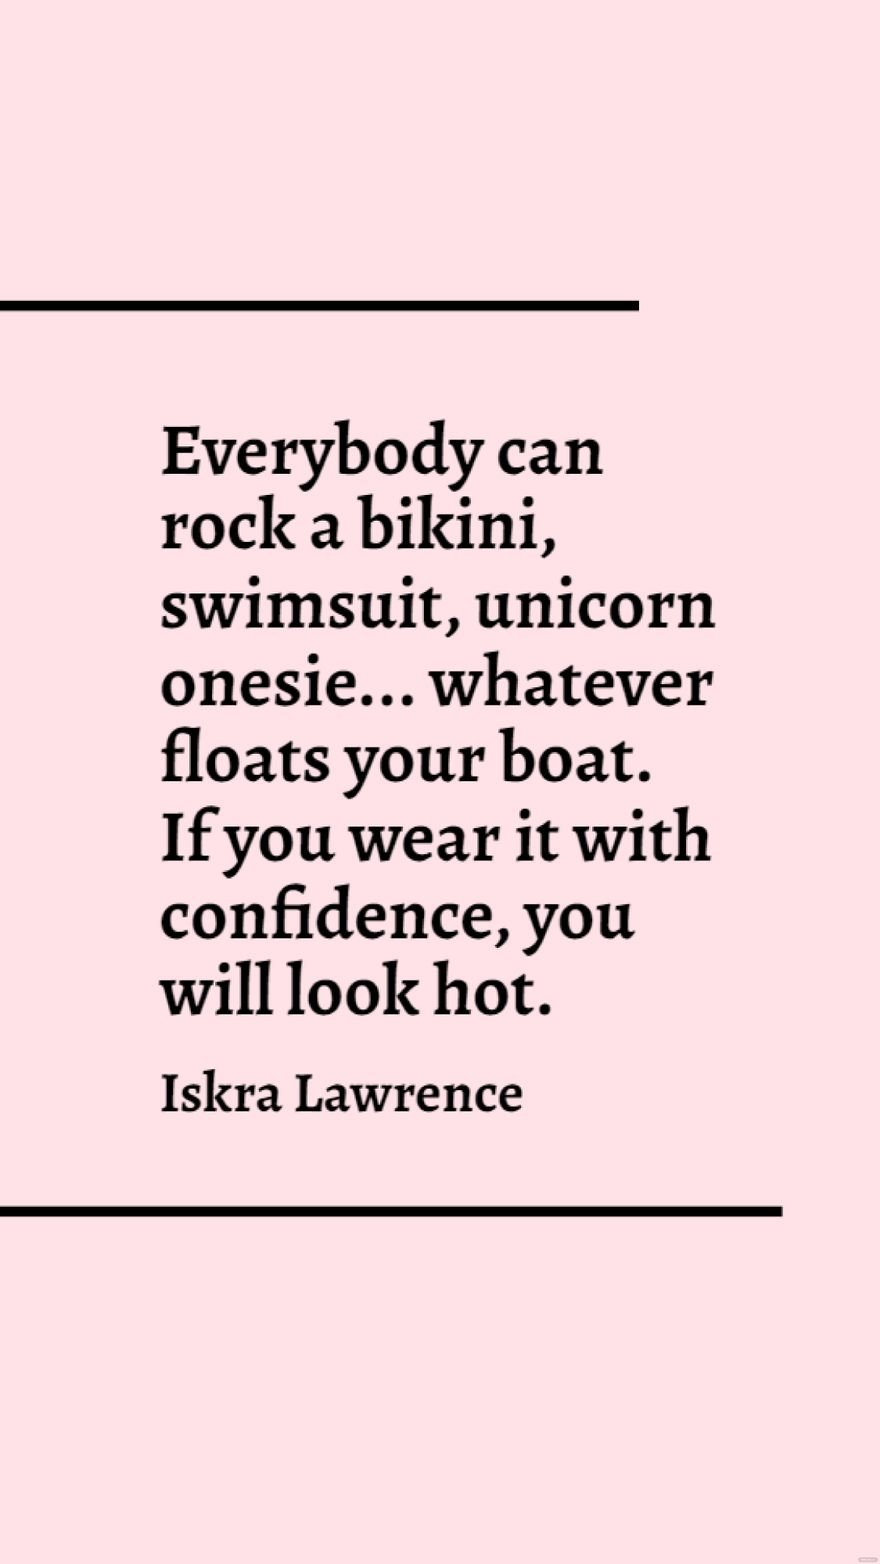 Iskra Lawrence - Everybody can rock a bikini, swimsuit, unicorn onesie... whatever floats your boat. If you wear it with confidence, you will look hot. 